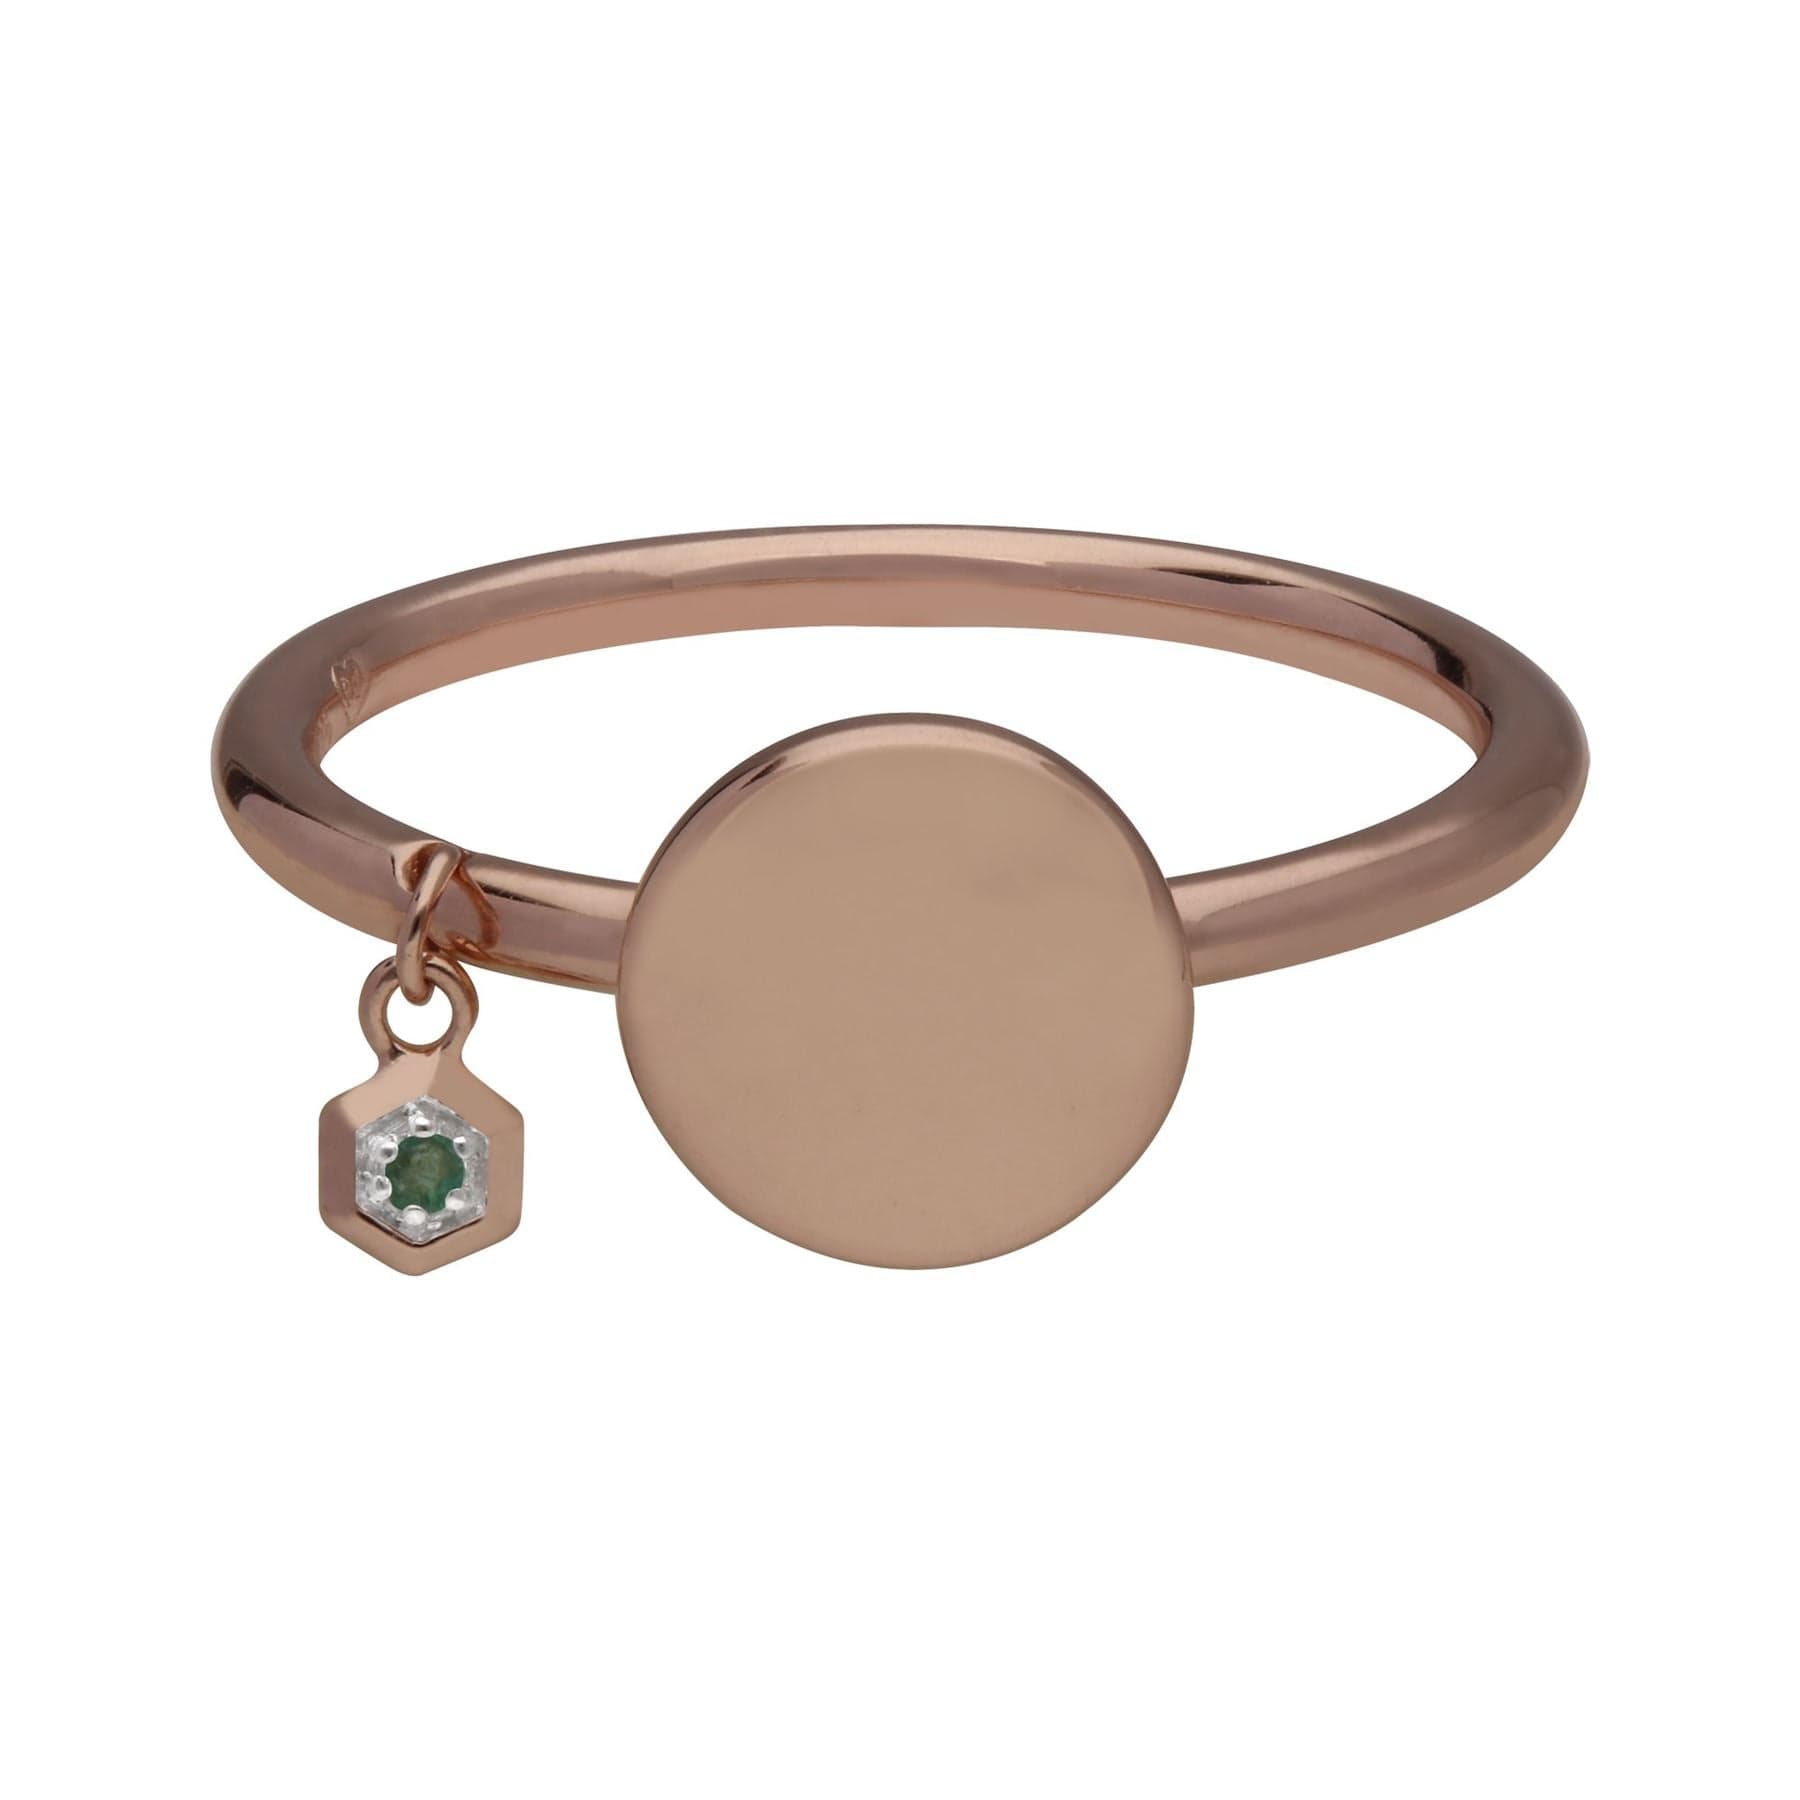 Emerald Engravable Ring in Rose Gold Plated Sterling Silver - Gemondo